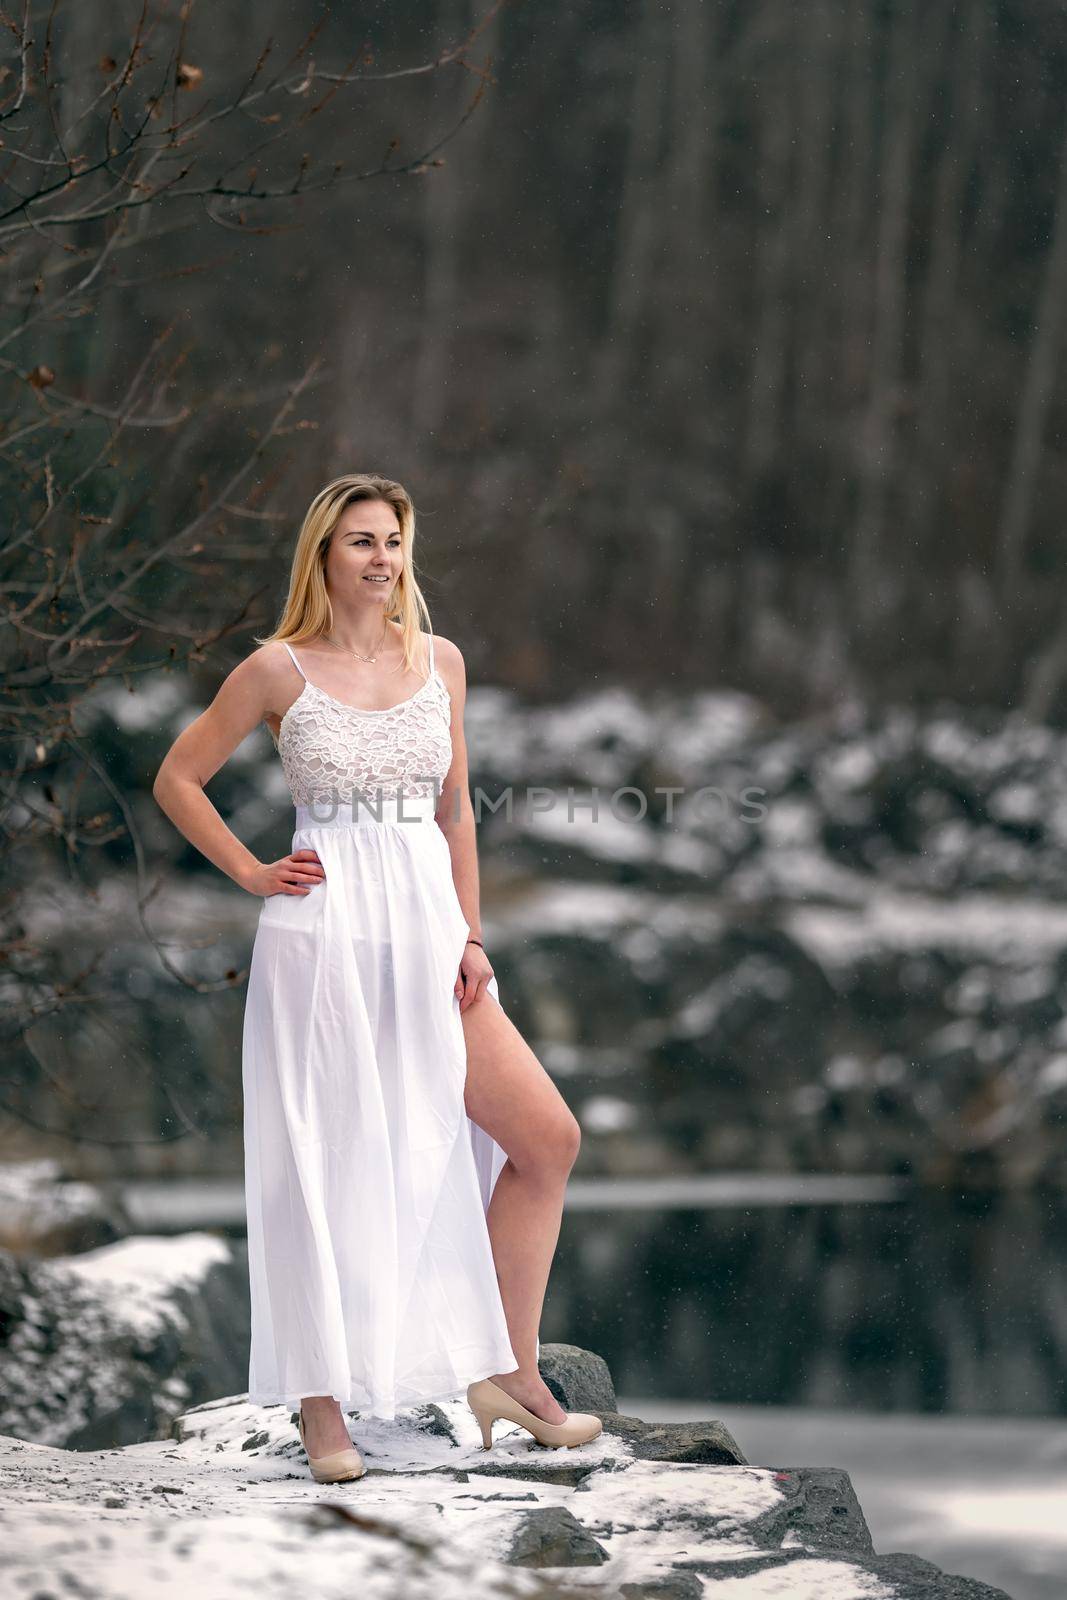 A young woman in a white dress on the shore of a lake in the winter in a snowy landscape by Edophoto